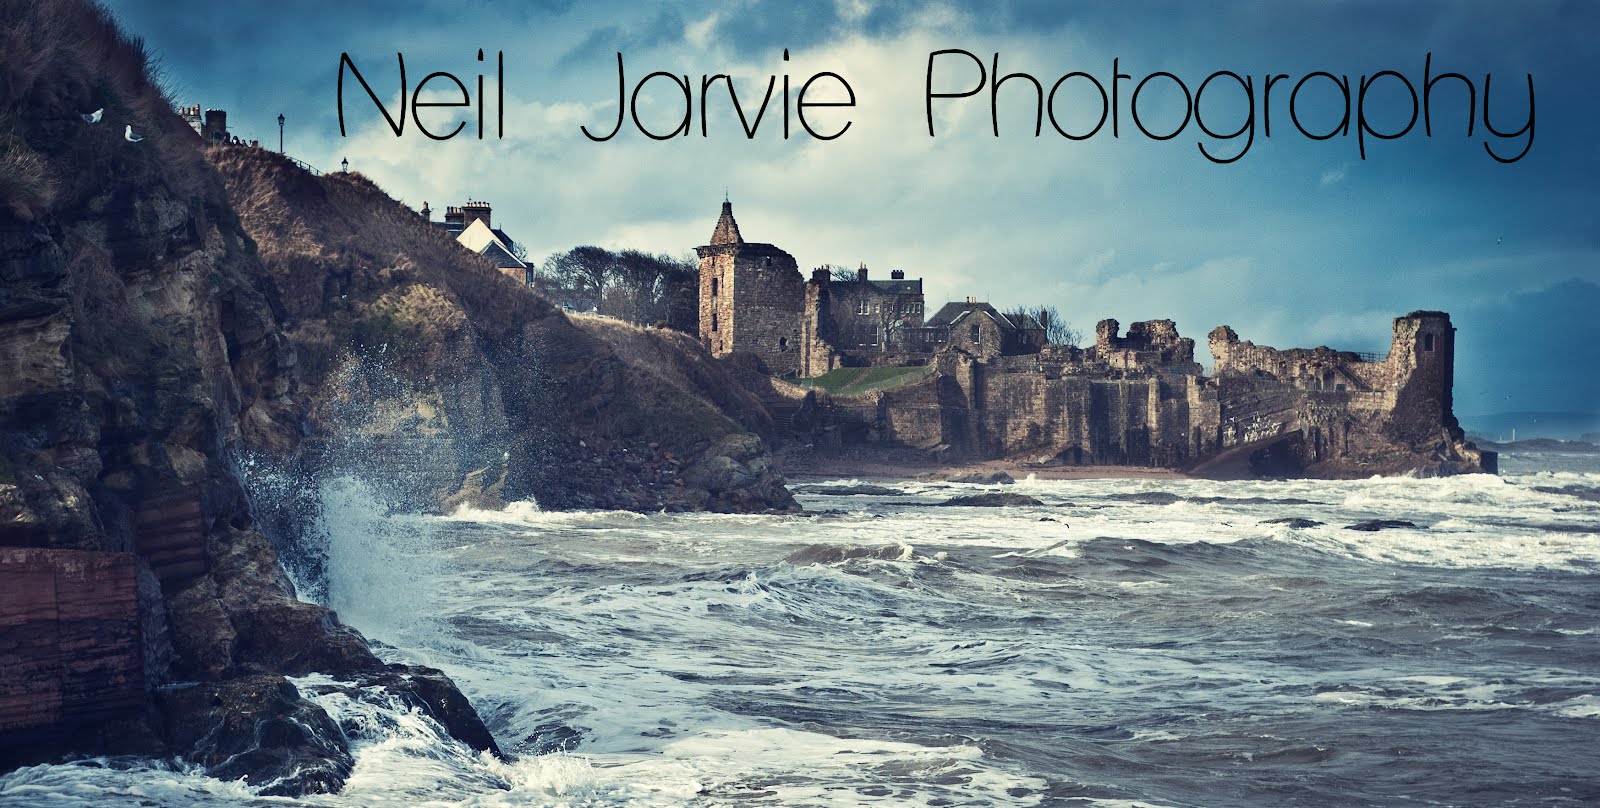 Neil Jarvie Photography